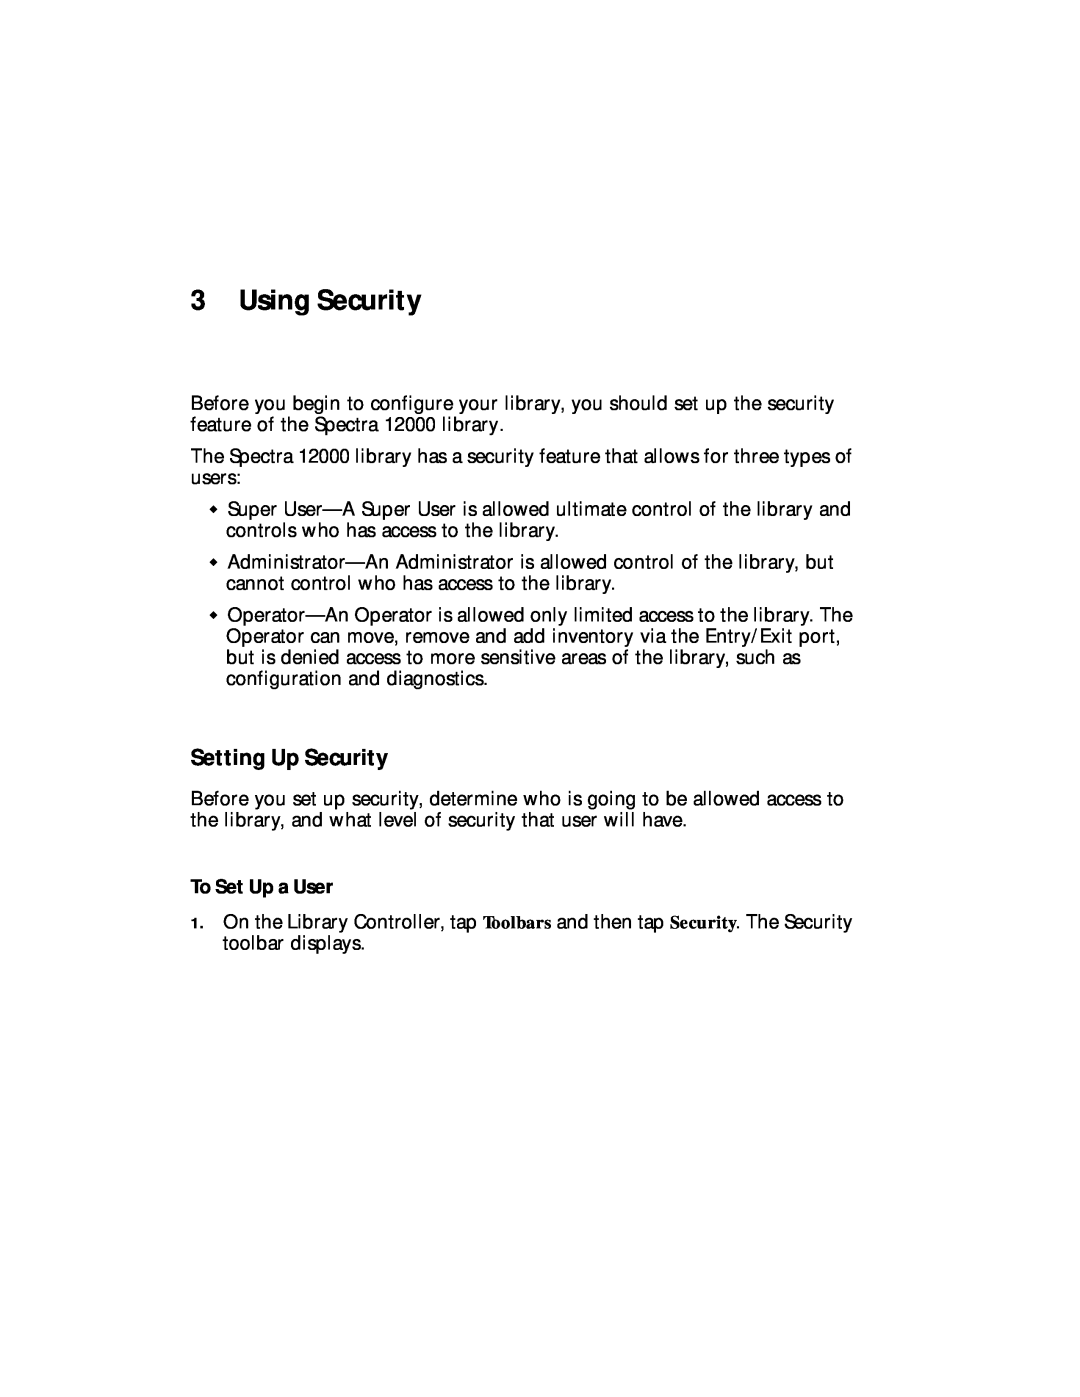 Spectra Logic Spectra 12000 manual Using Security, Setting Up Security, To Set Up a User 